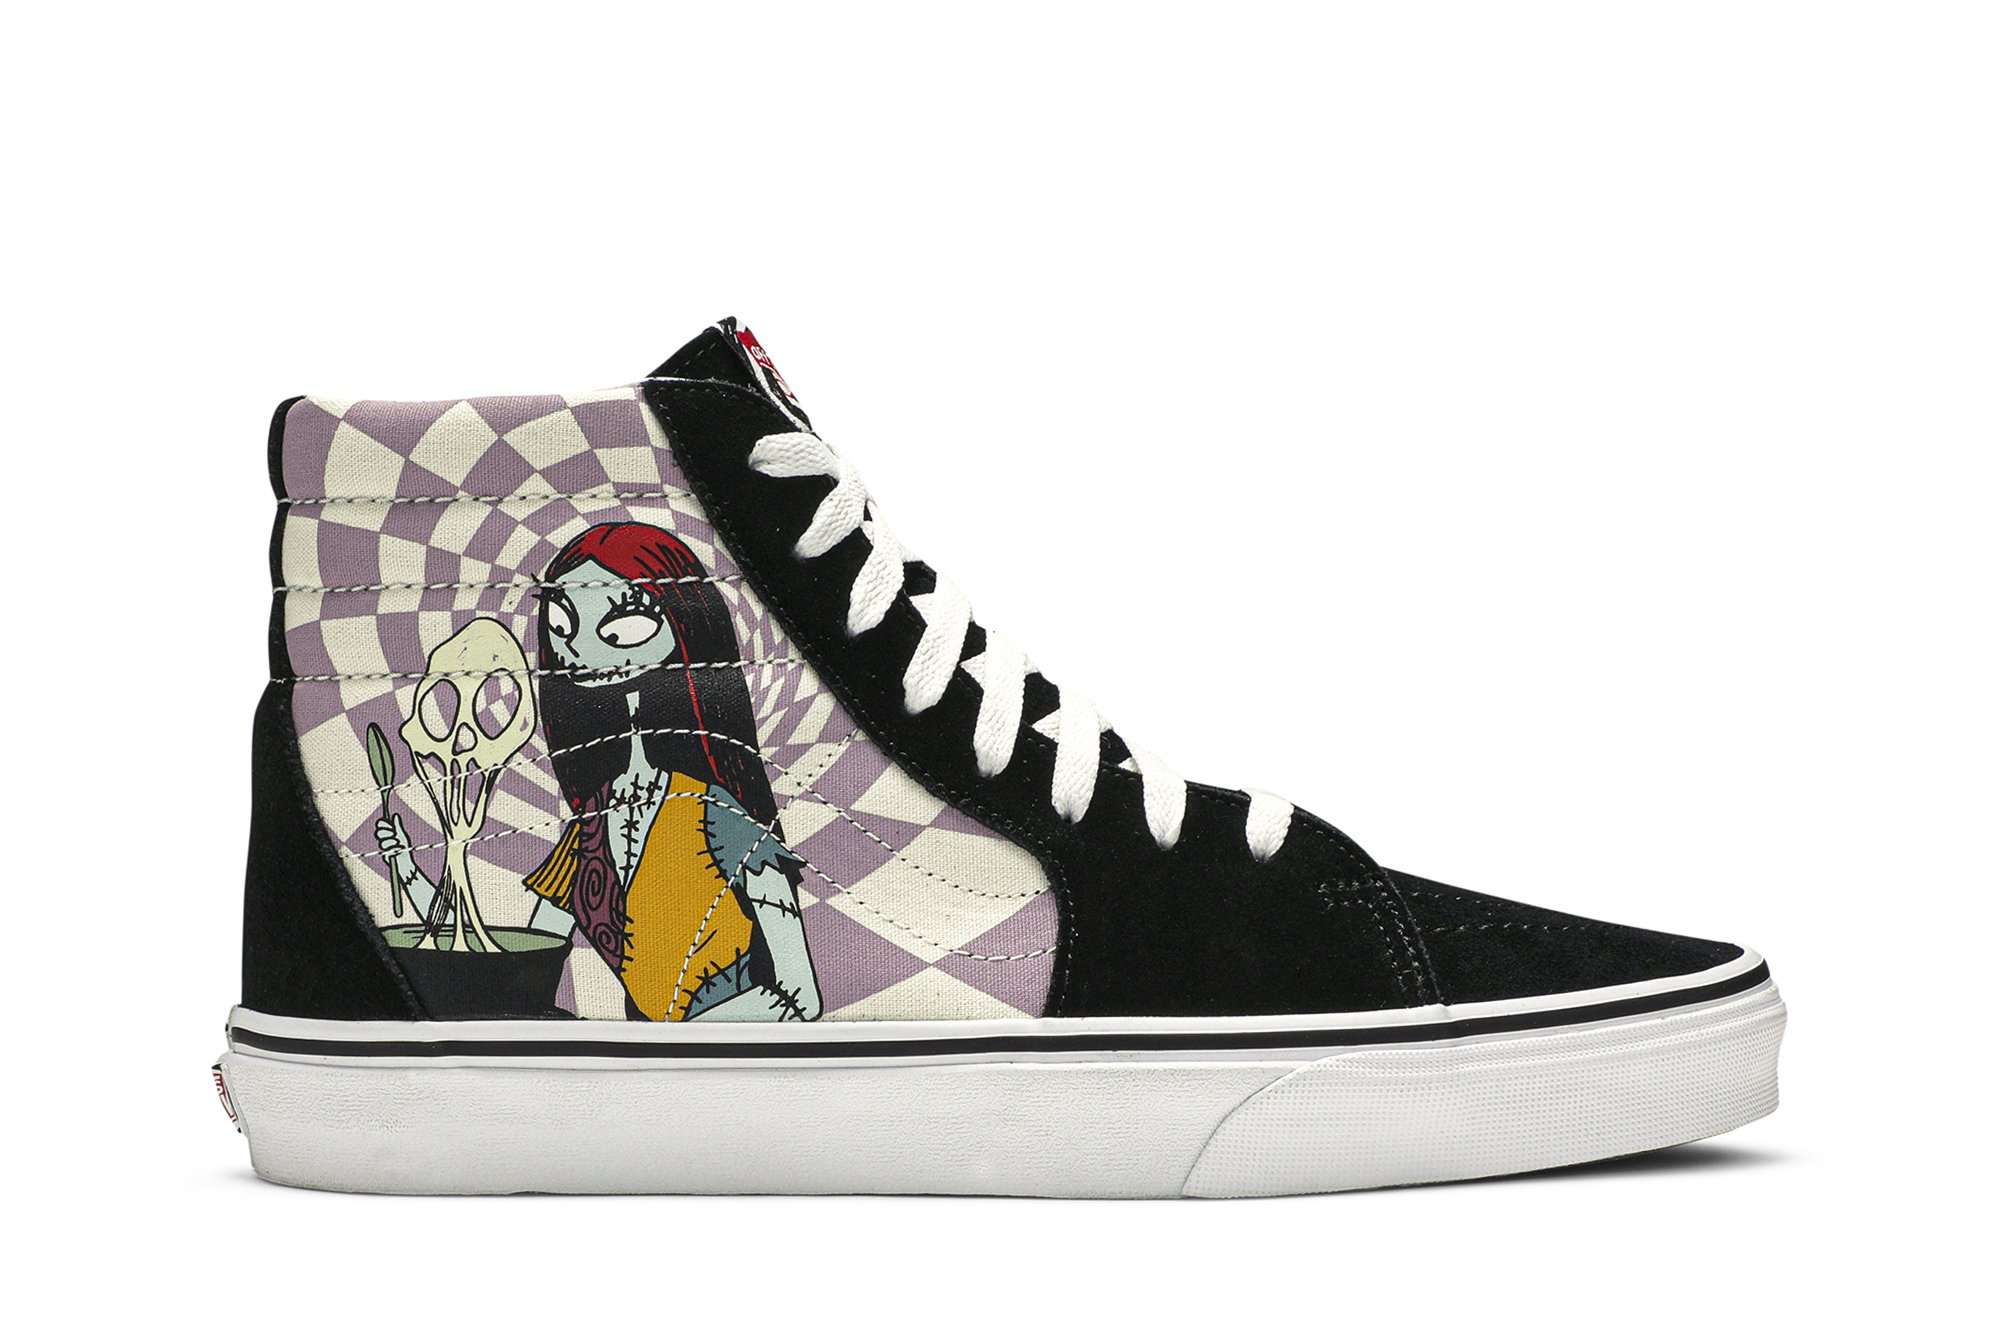 The Nightmare Before Christmas x Sk8-Hi 'Sally's Potion'